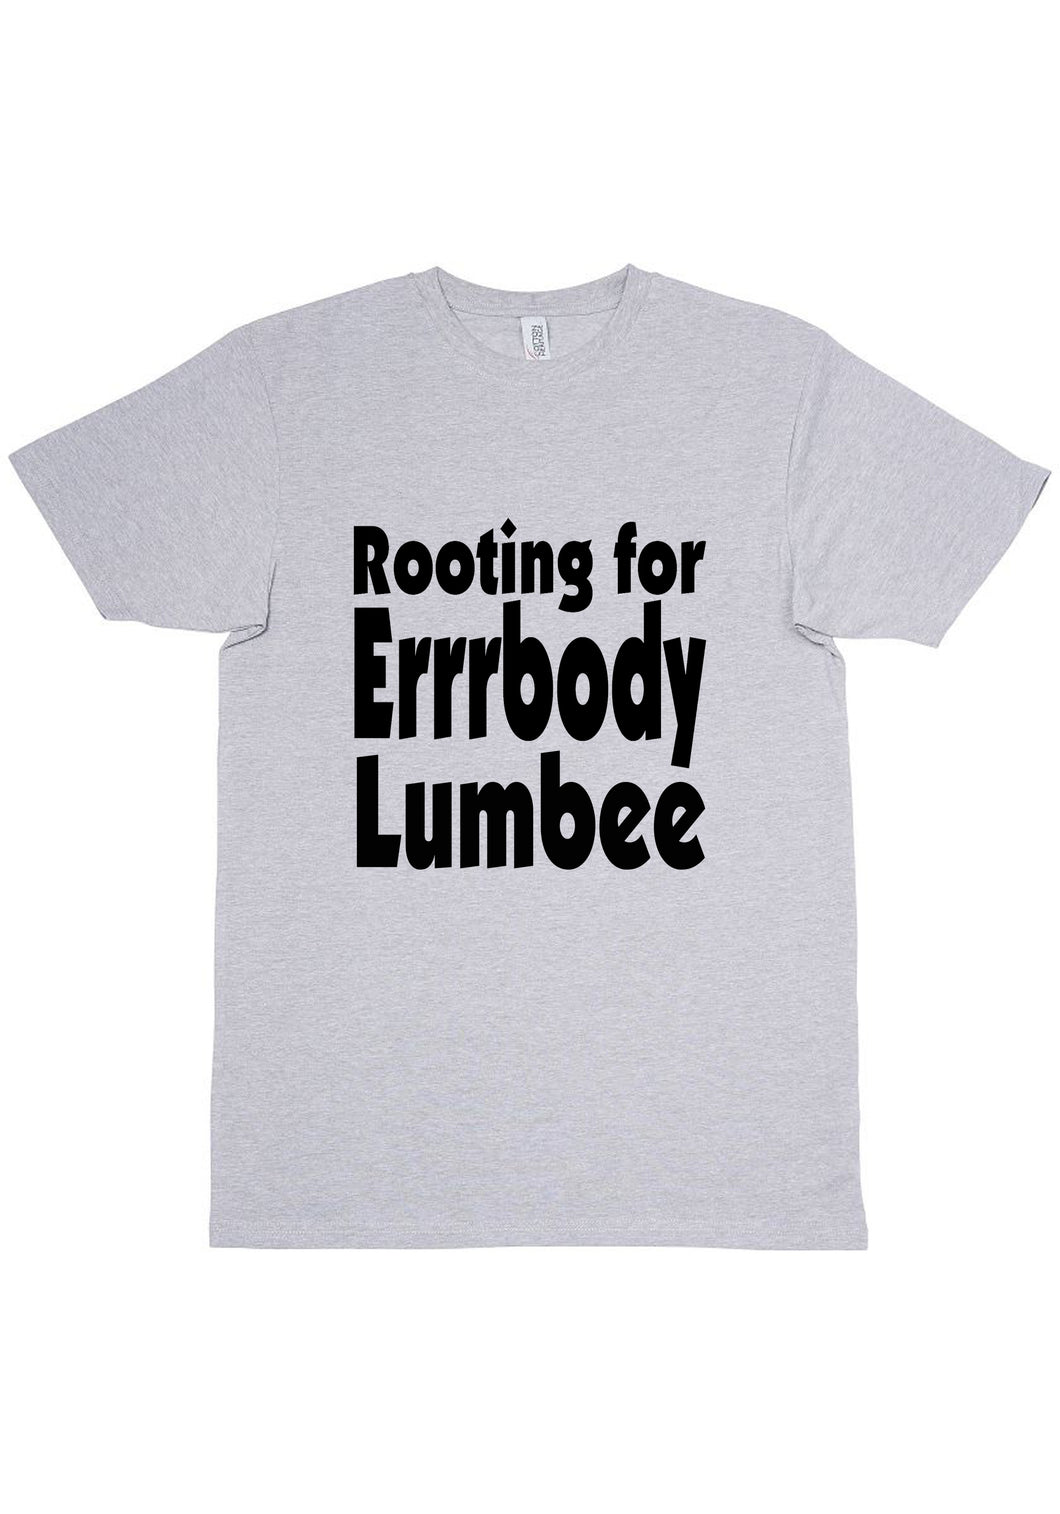 Rooting For Lumbee T-Shirt